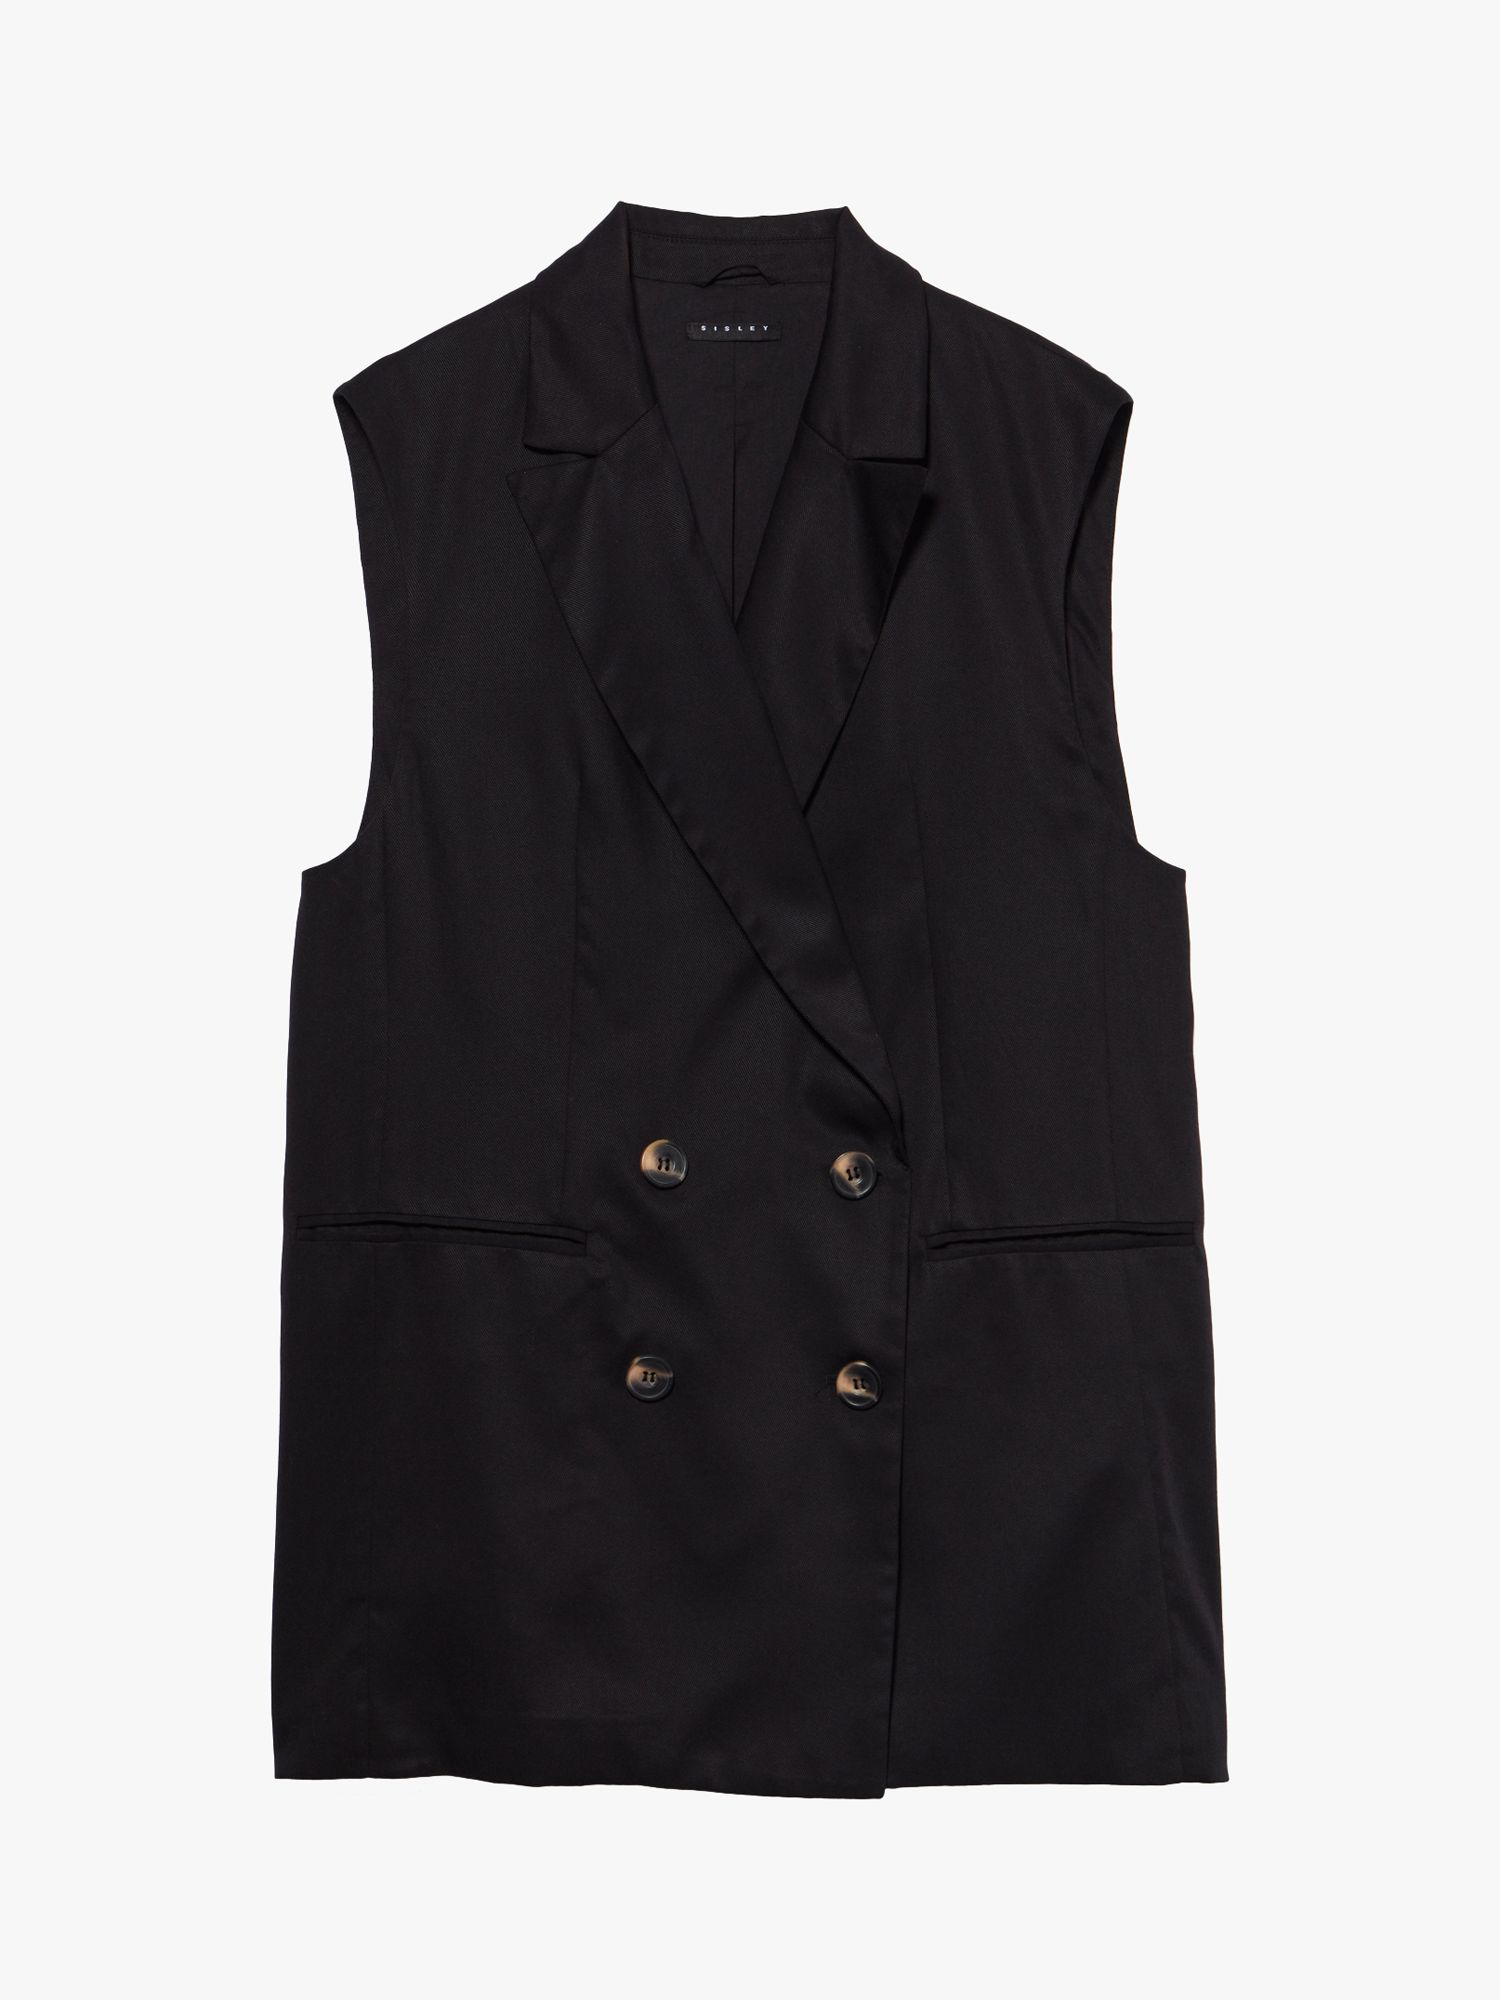 Buy SISLEY Double Breasted Vest Online at johnlewis.com